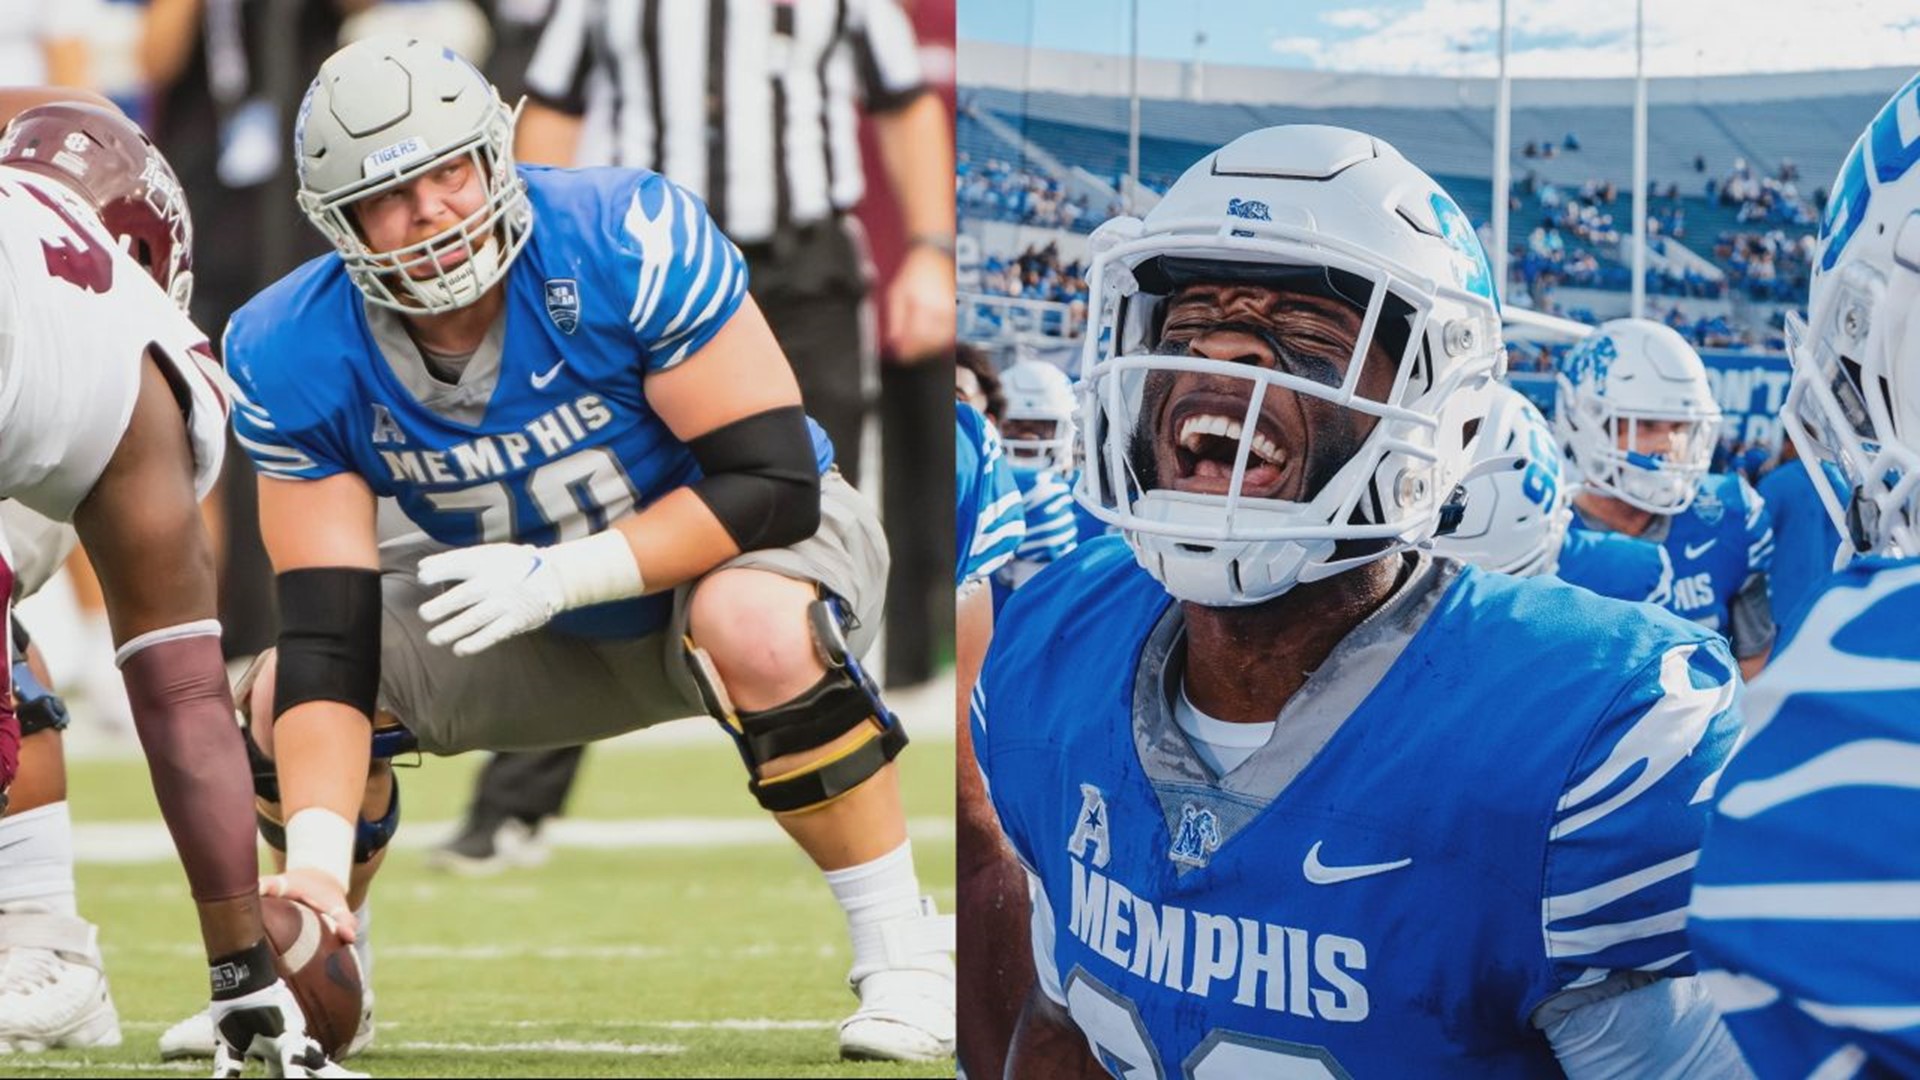 Friday will be the last time defensive end Jaylon Allen and center Jacob Likes wear Memphis across their chest and take the field.